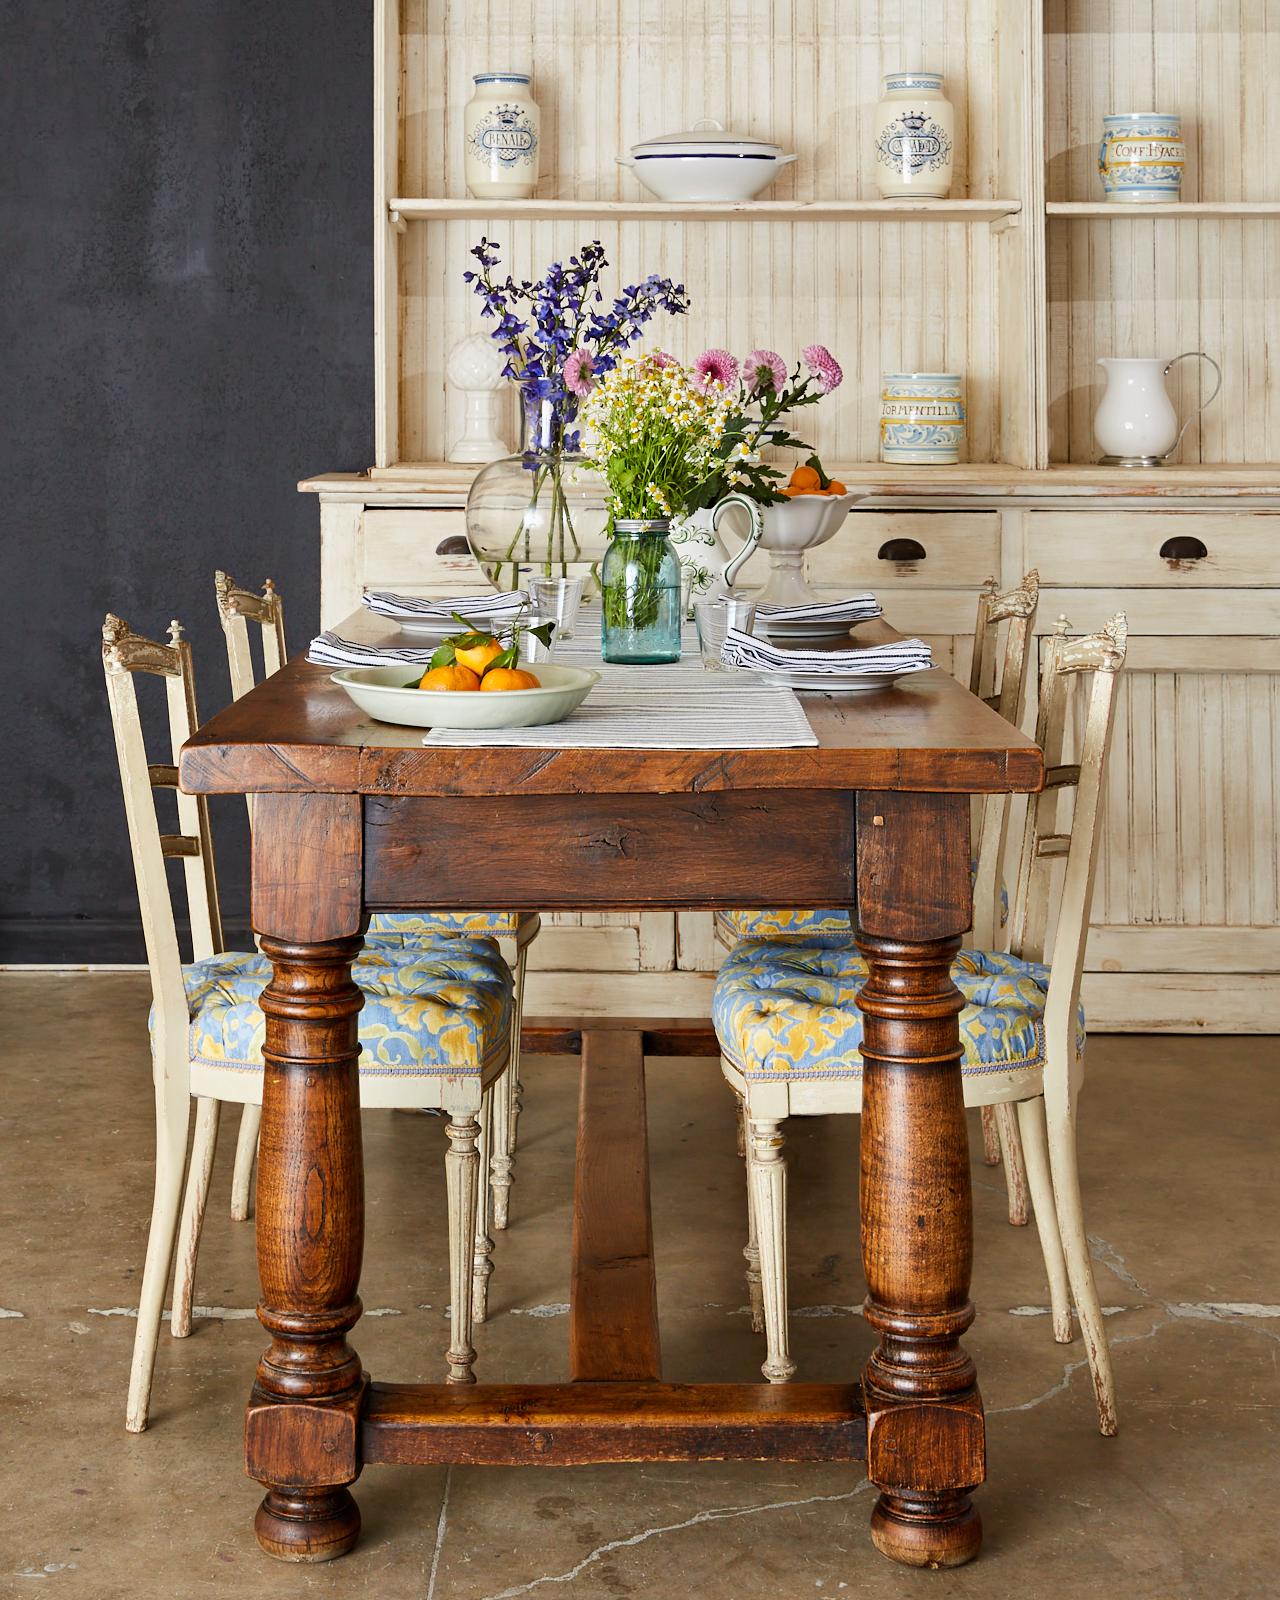 Rustic 19th century country French farmhouse dining table crafted from chestnut. Made in the Provincial style having a thick, nearly 2 inch plank top showcasing the rich chestnut grain patterns and knots. The trestle style base has a drawer in the